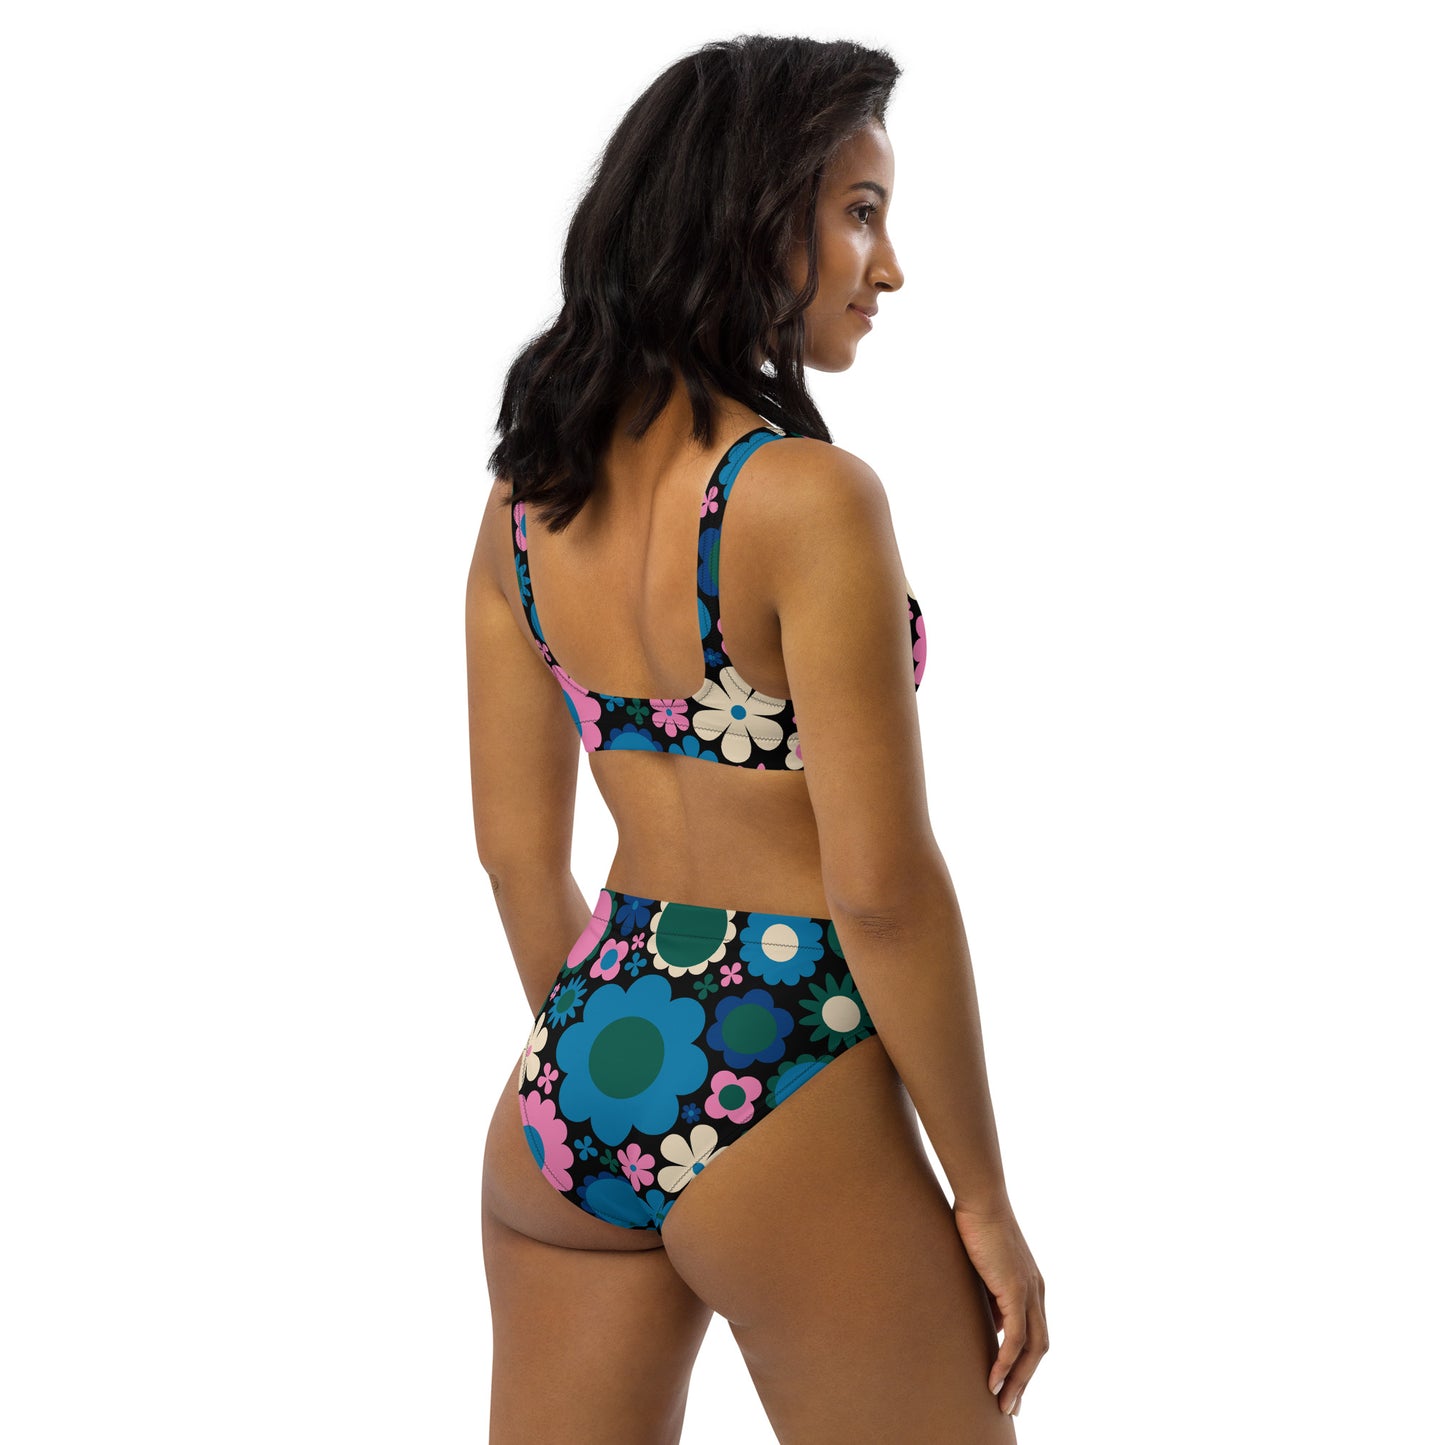 BLOOMPOP blue pink - Bikinis made of recycled material